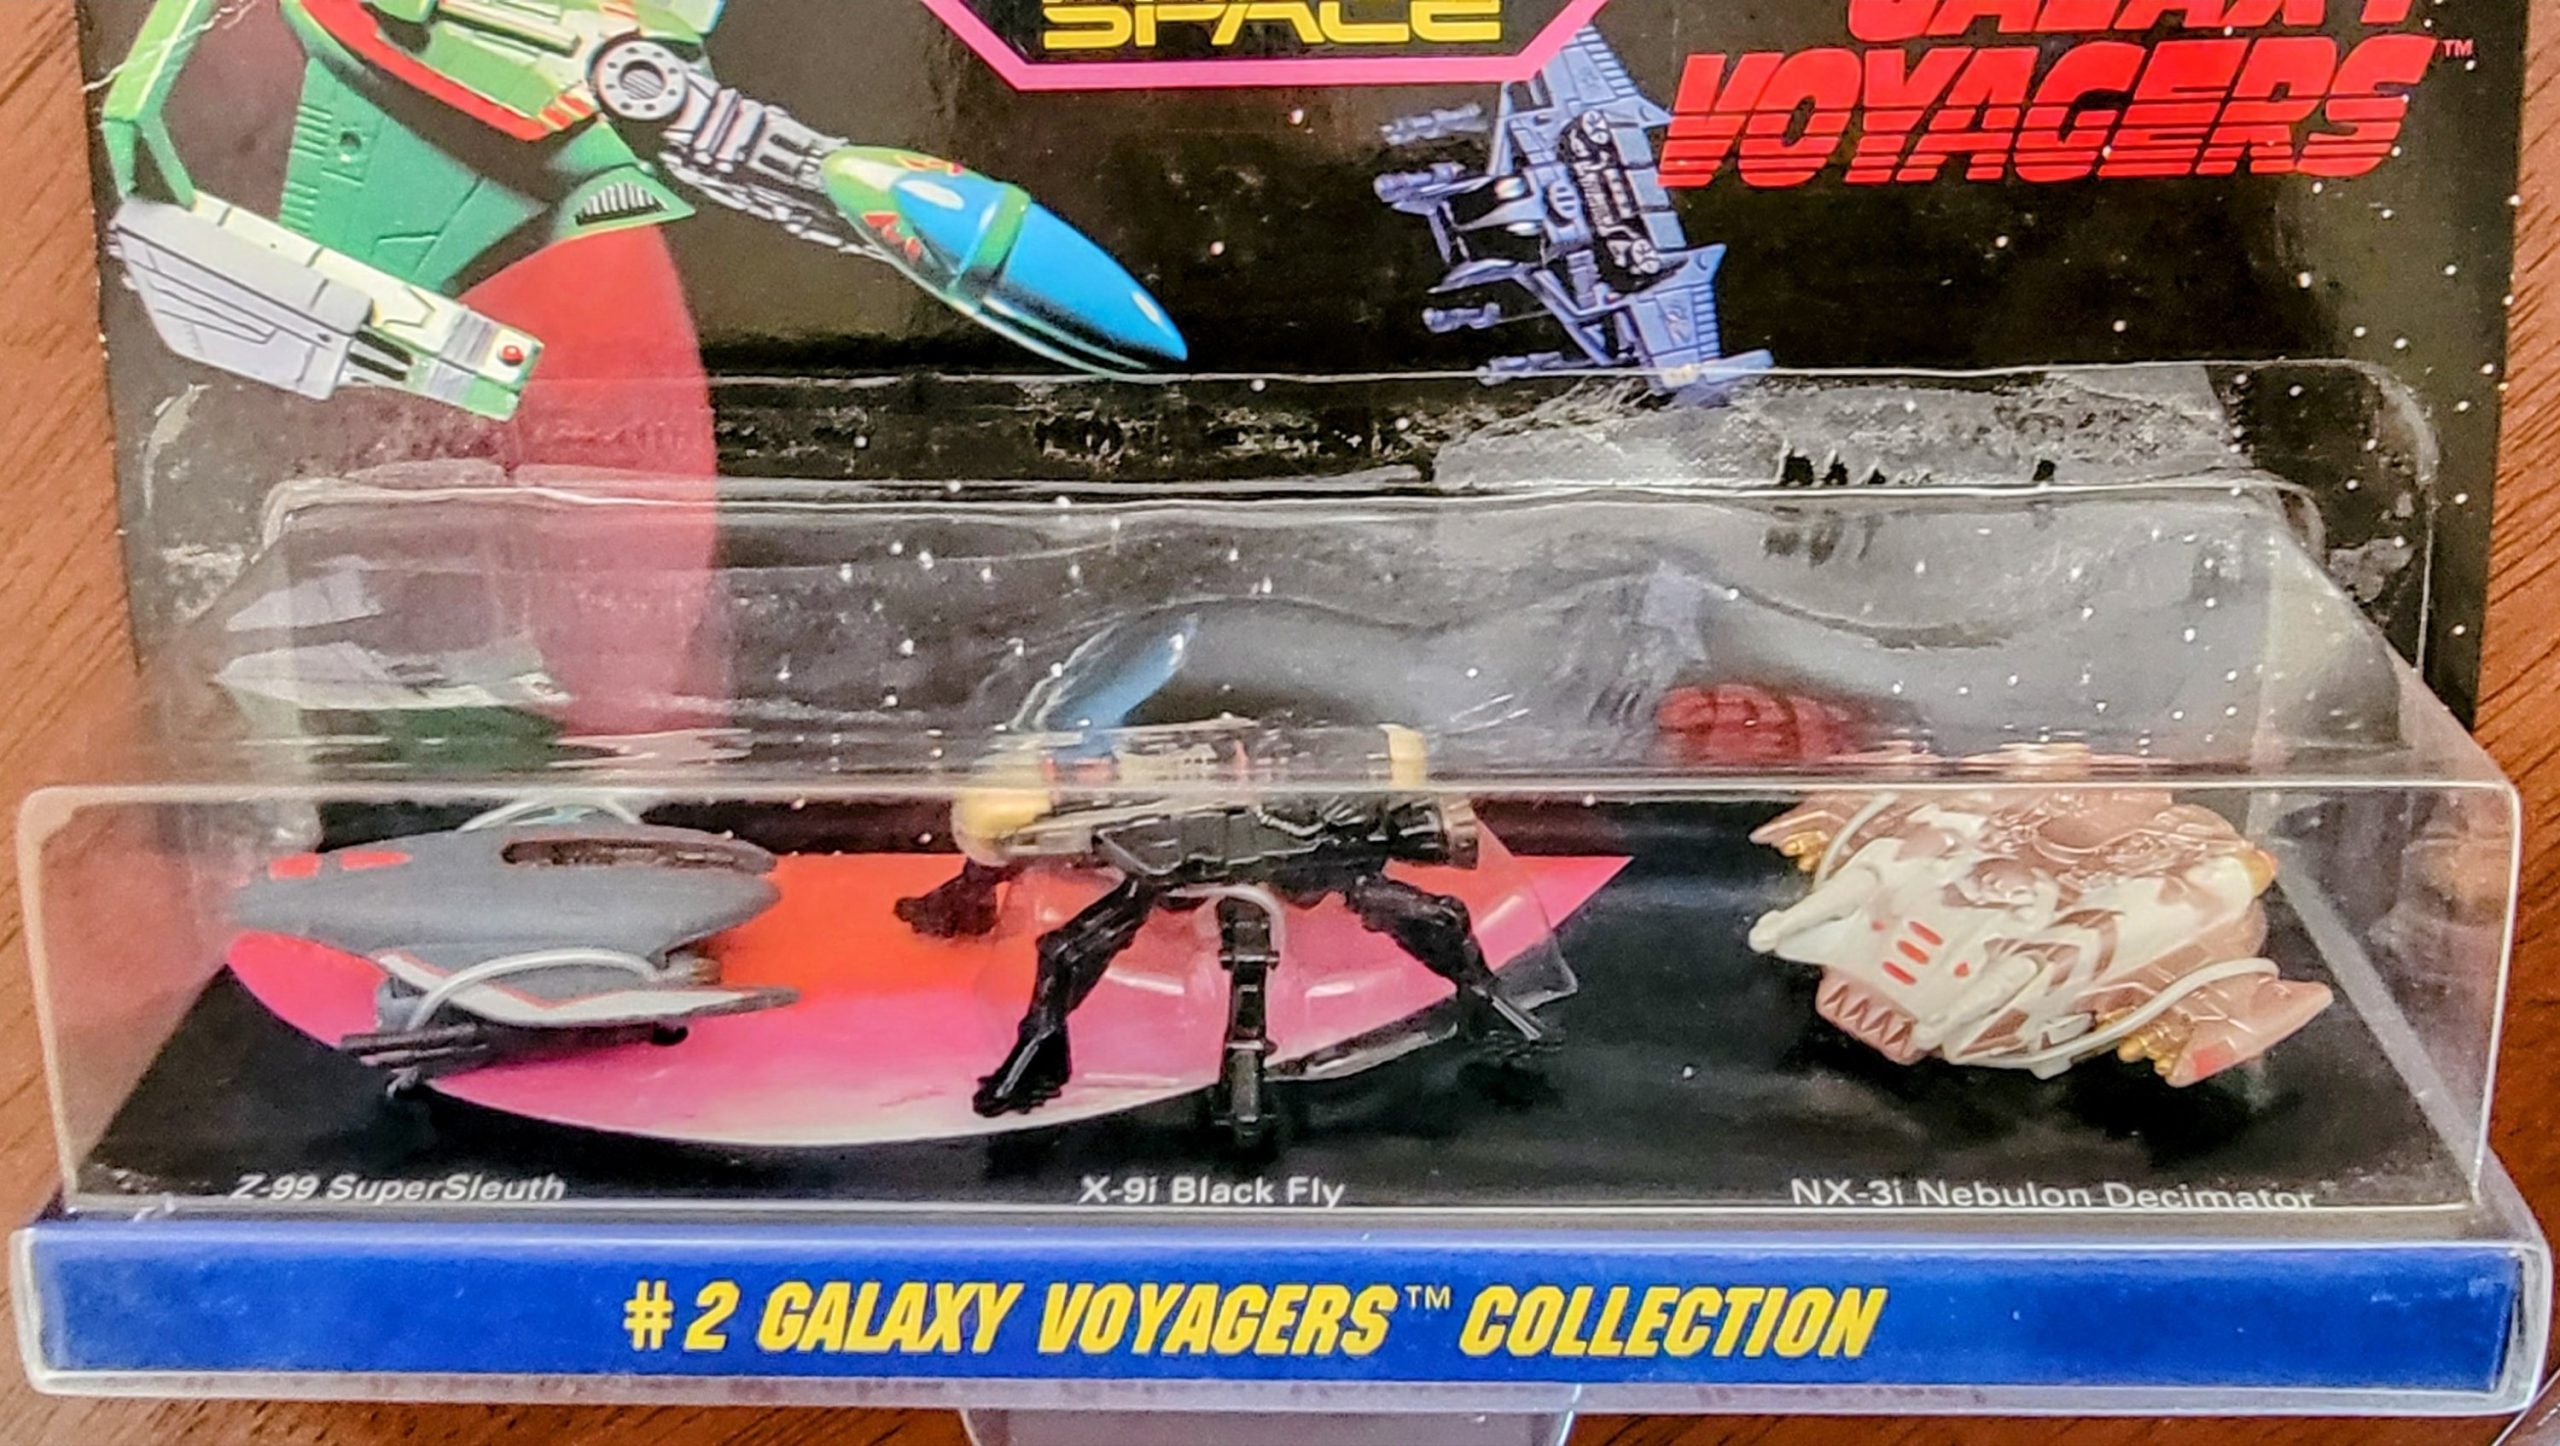 Micro Machines Galaxy Voyagers #2, Micro Machines Galaxy Voyagers #2 Collectible Space Vehicle Miniature Toy Playset simple Xclusive Collectibles   